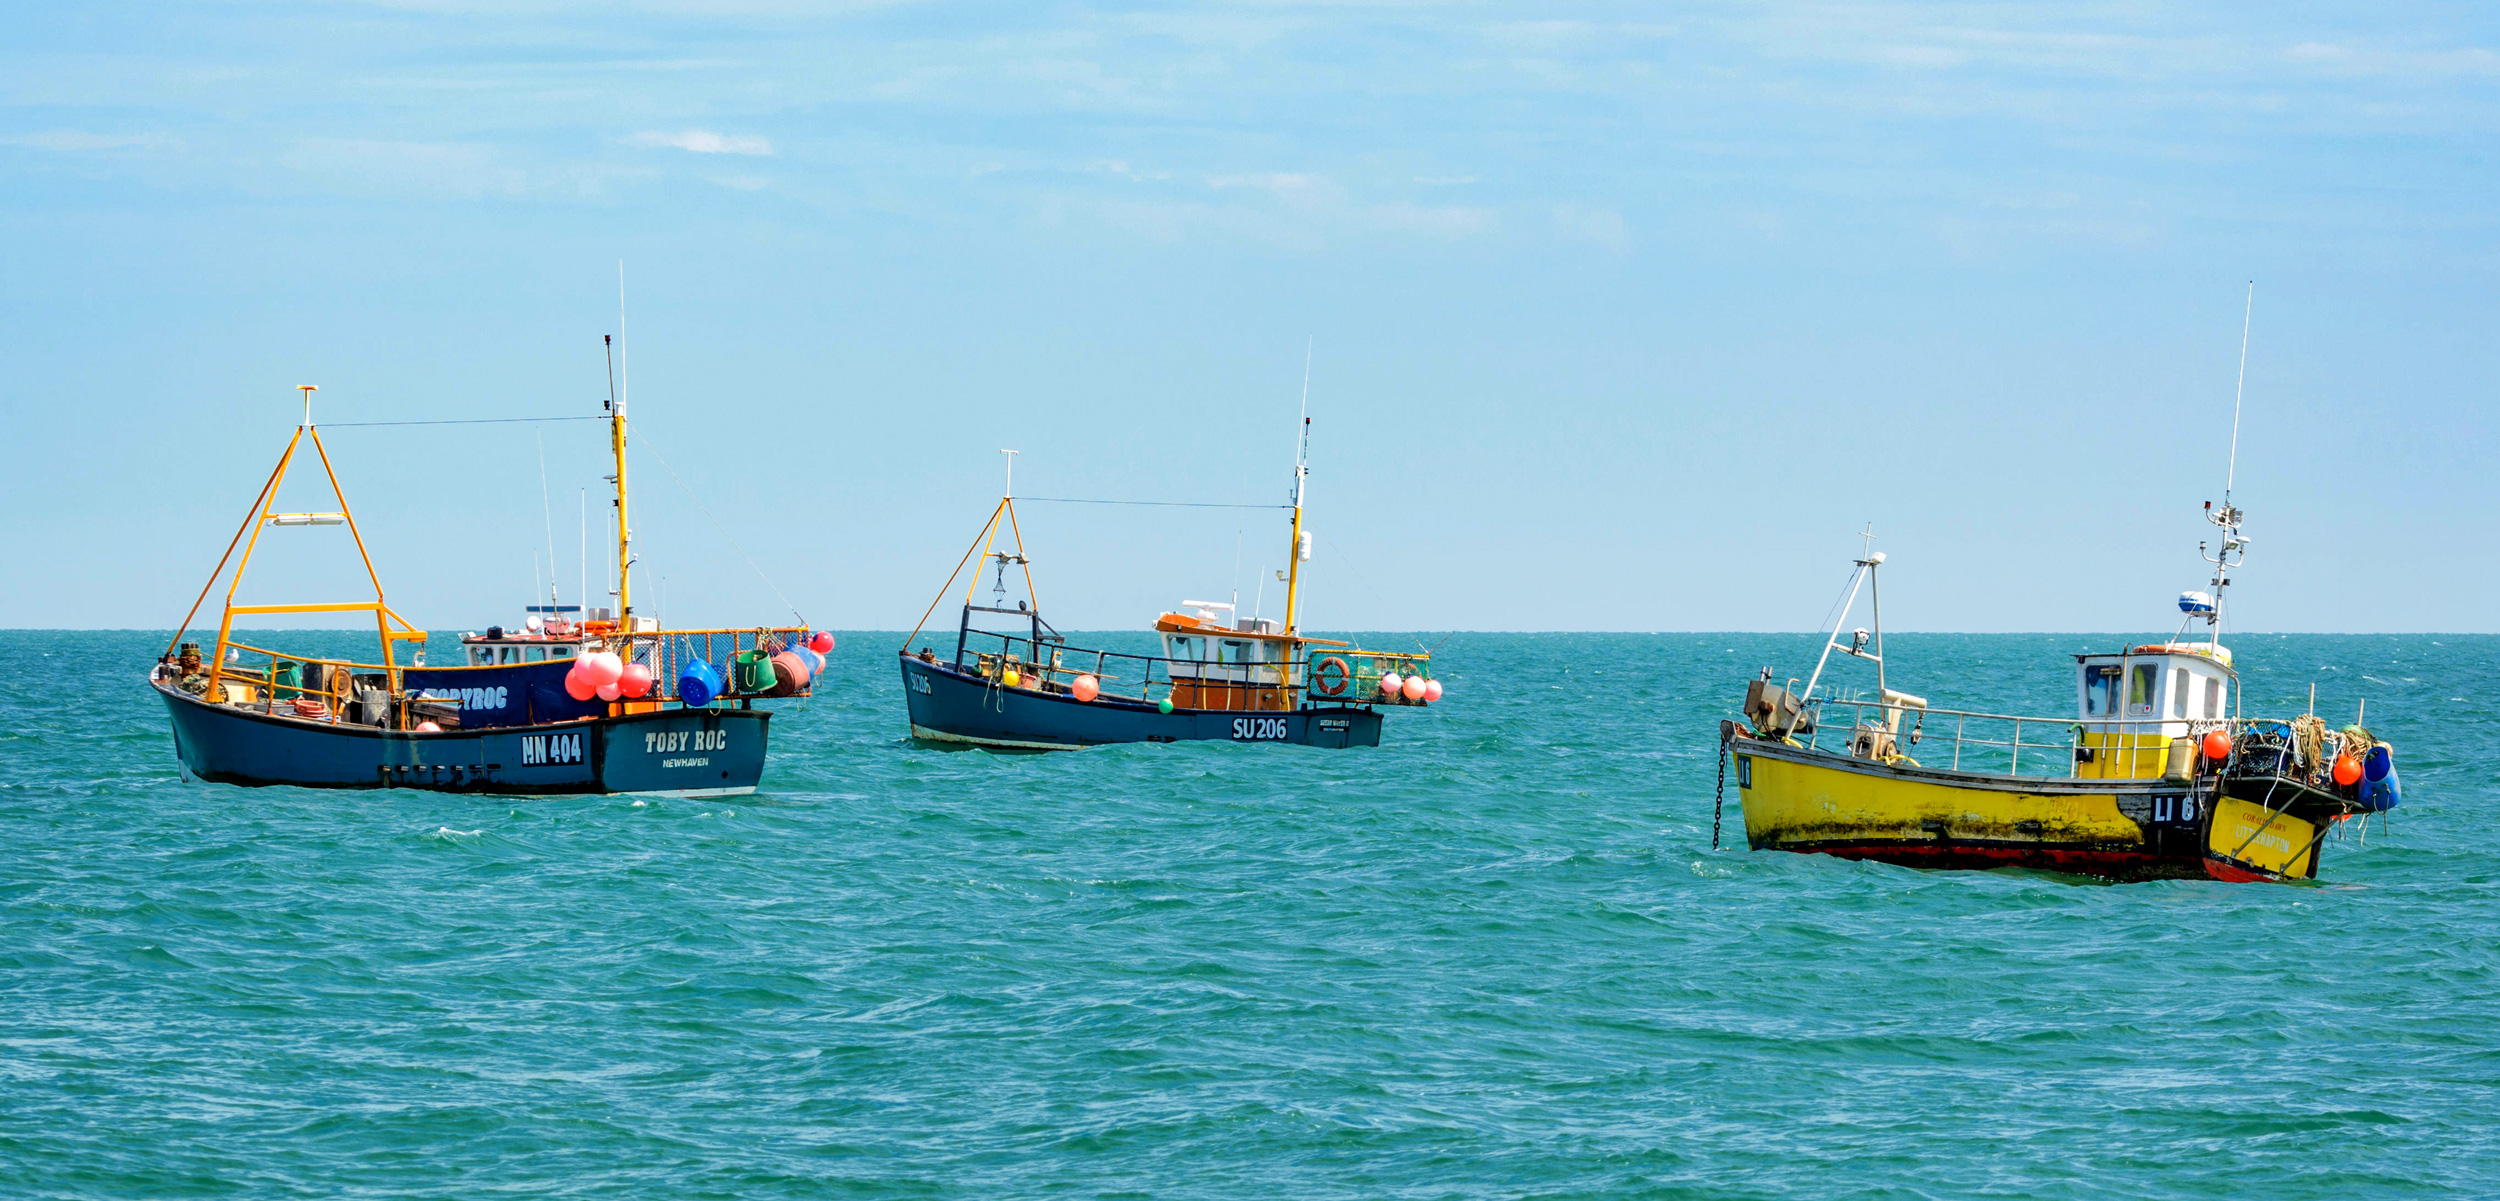 fishing boats in the English Channel